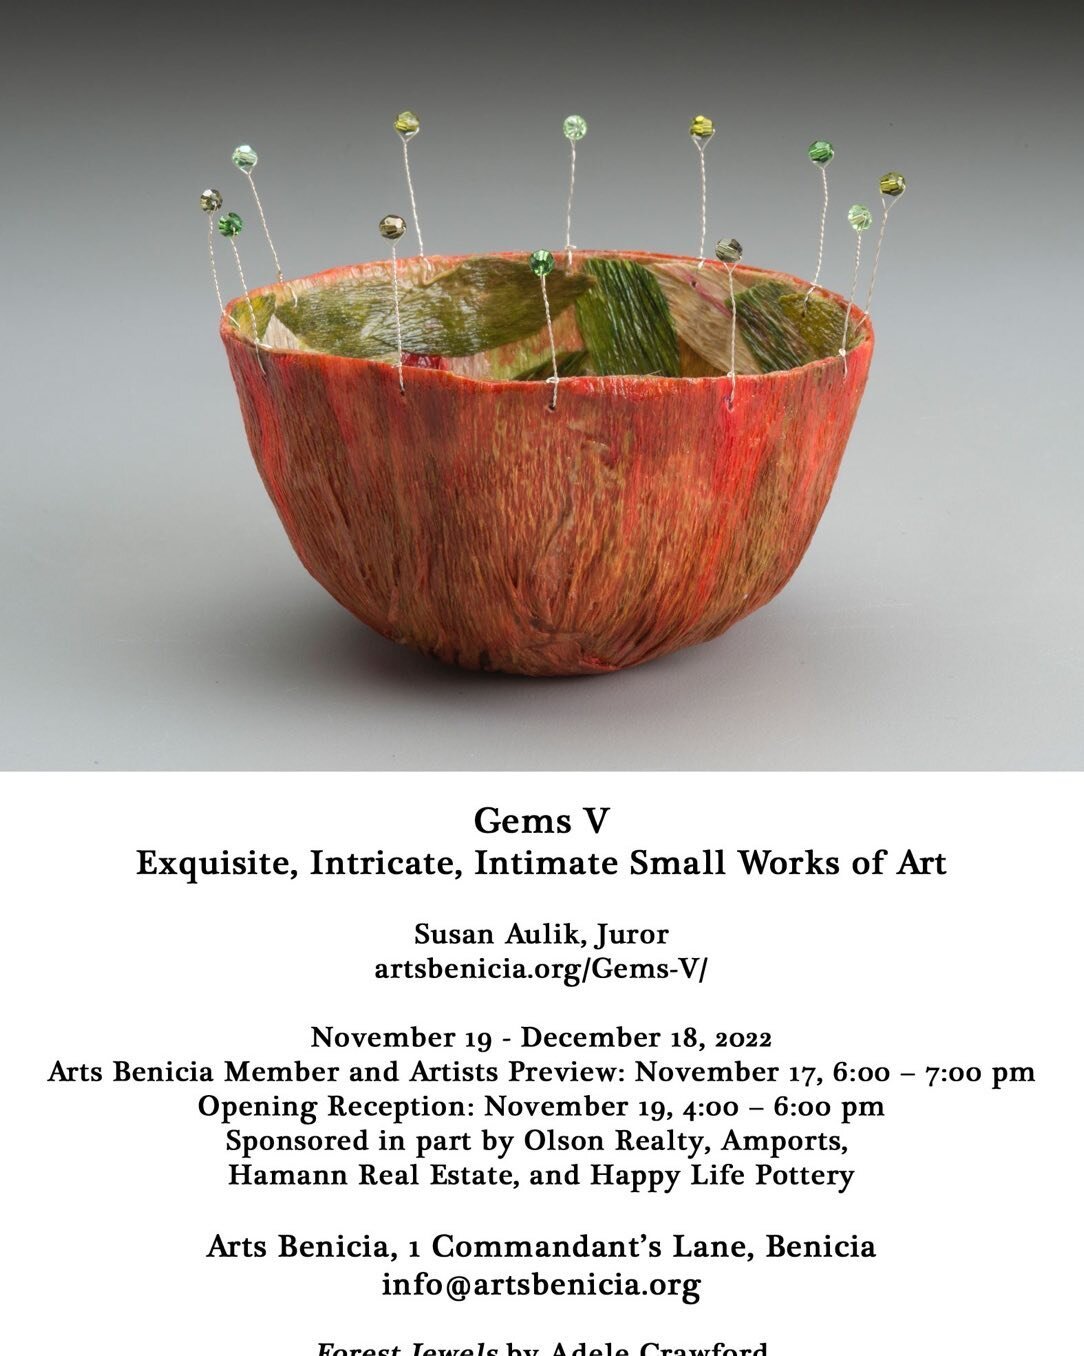 Gems 💎 
I&rsquo;m pleased to have 2 works included in this show, jurored by artist Susan Aulik. Opens next Saturday.